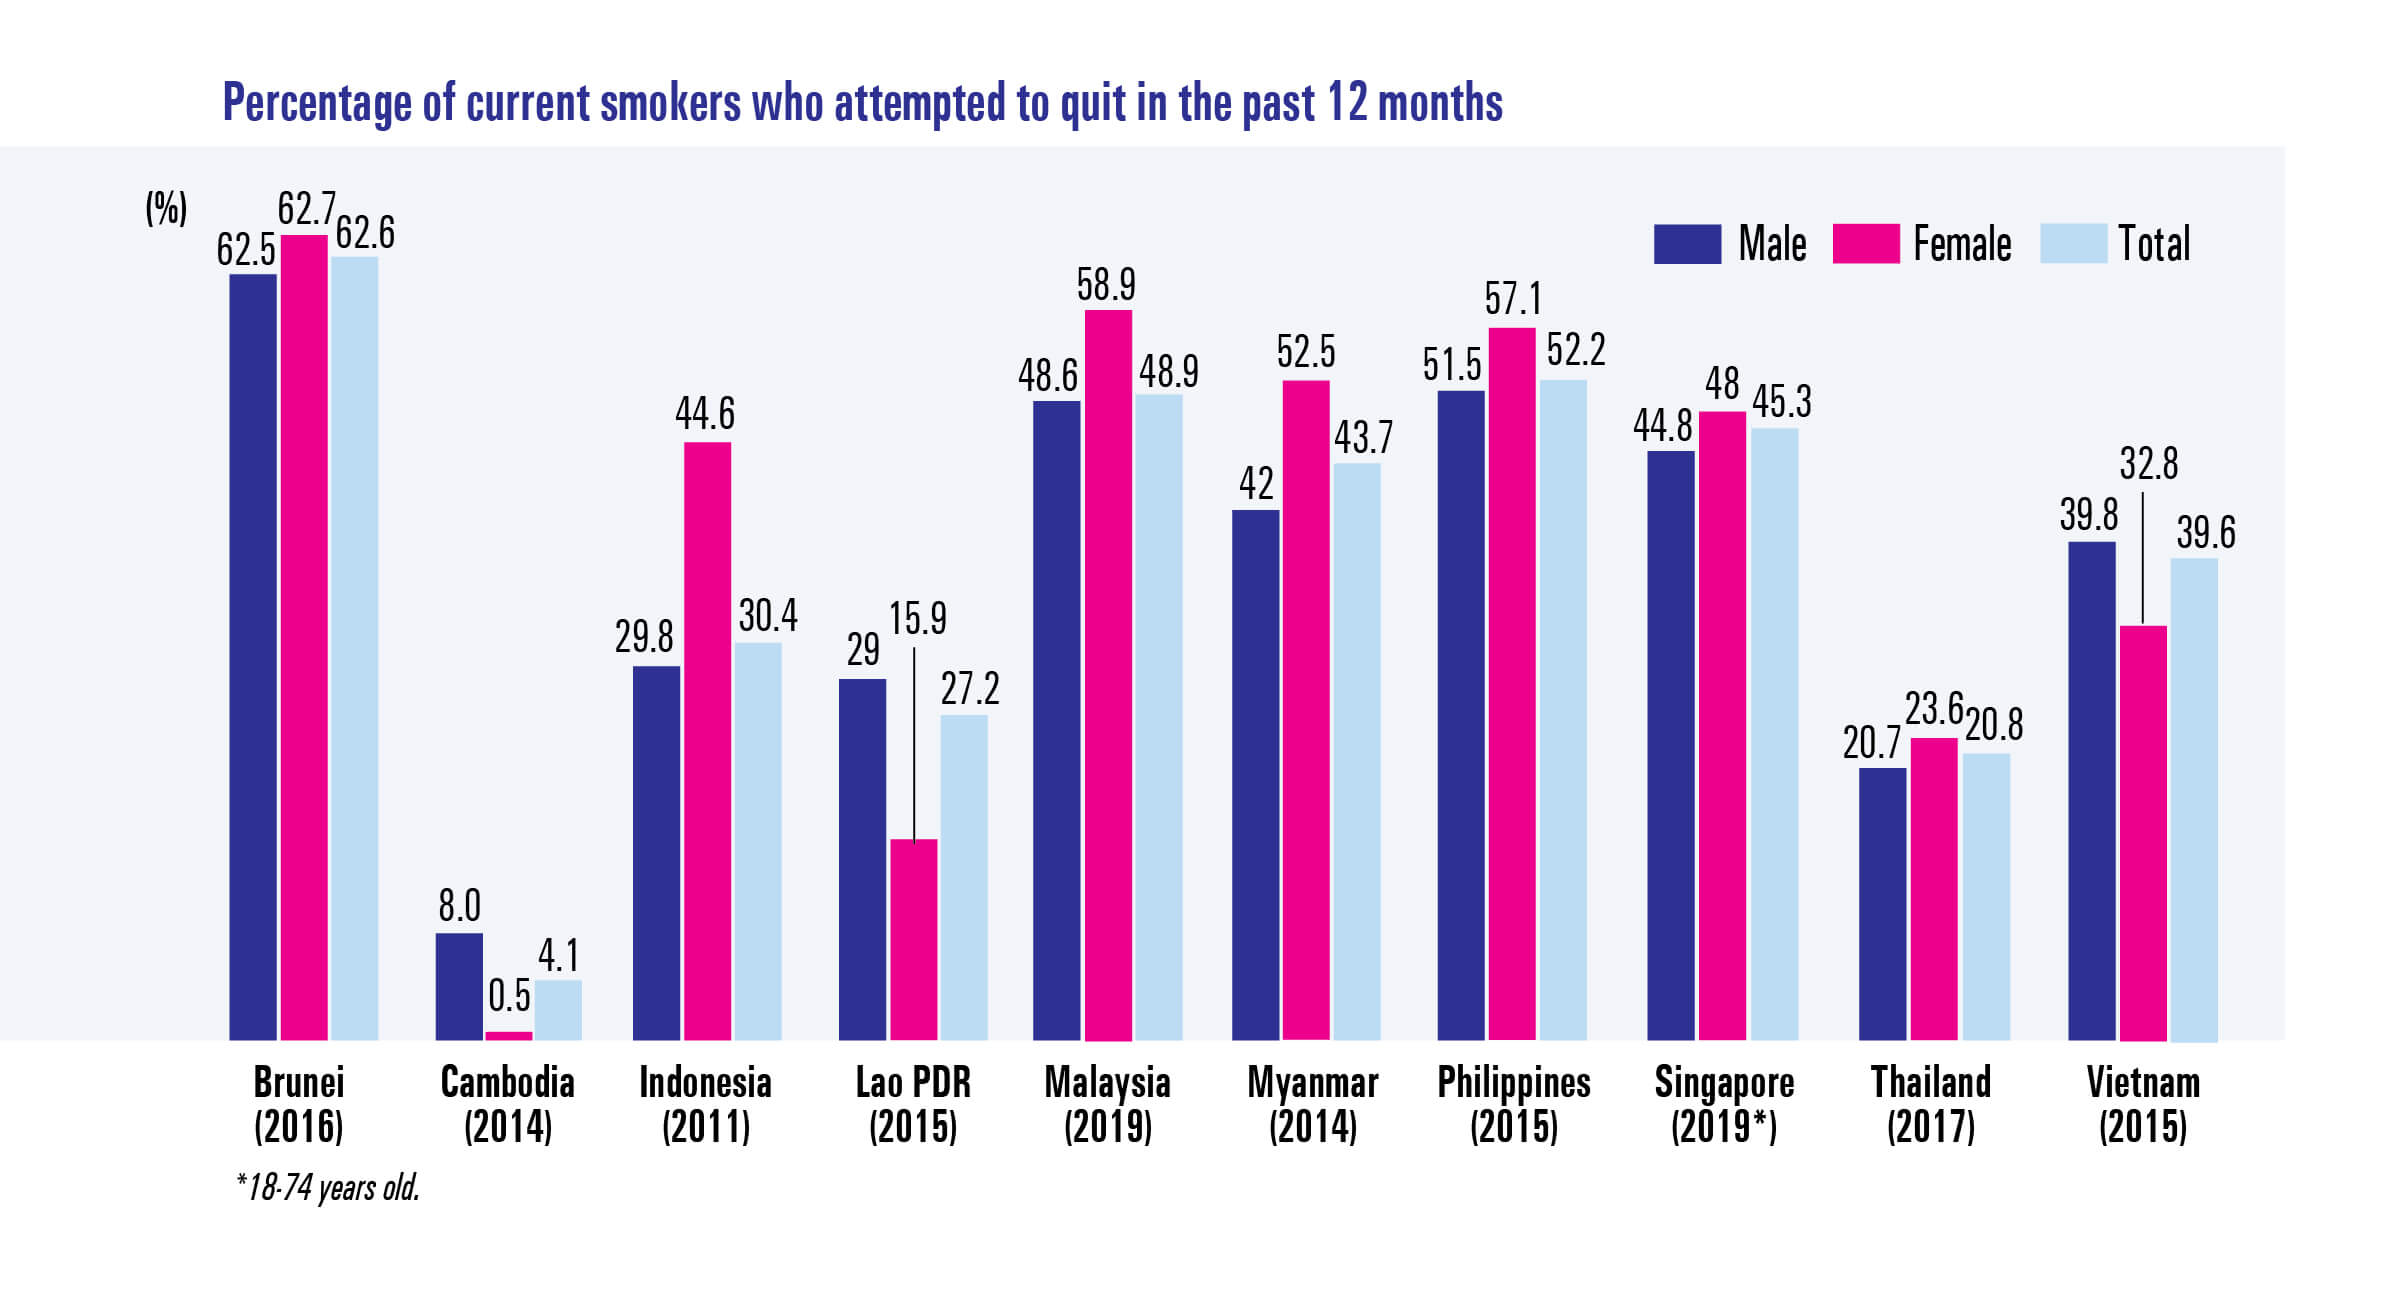 Percentage of current smokers who attempted to quit in the past 12 months